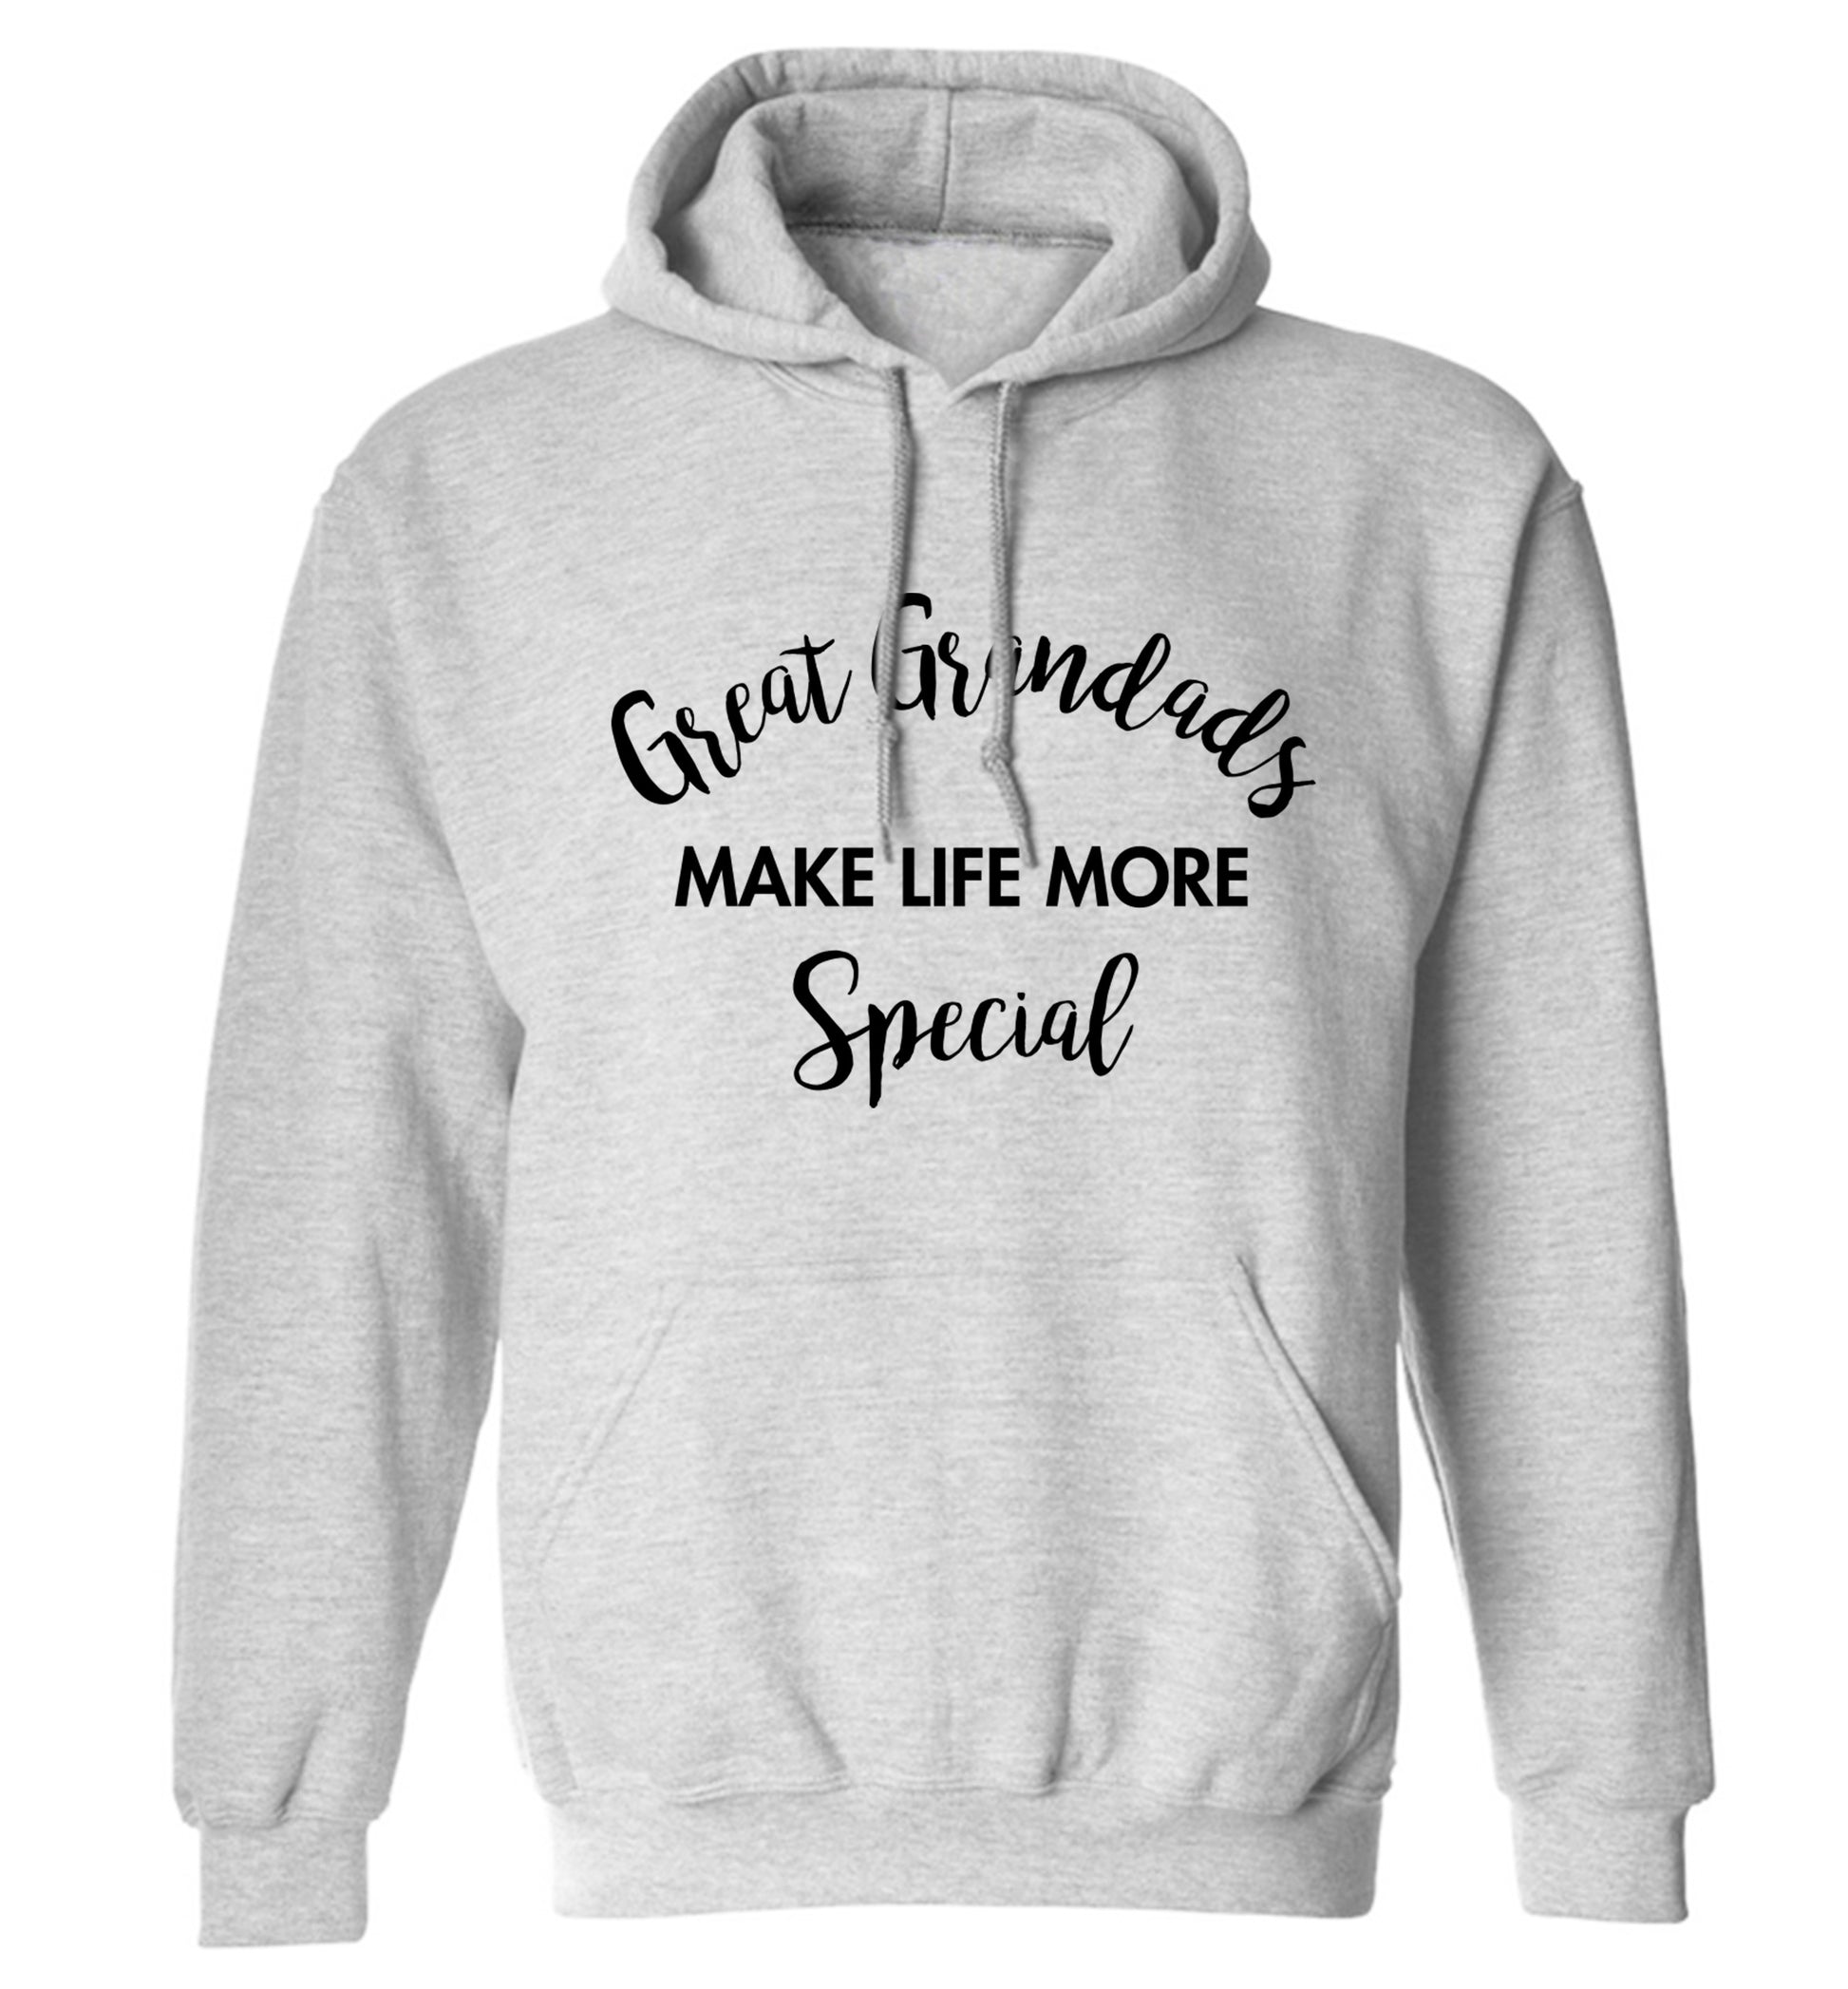 Great Grandads make life more special adults unisex grey hoodie 2XL